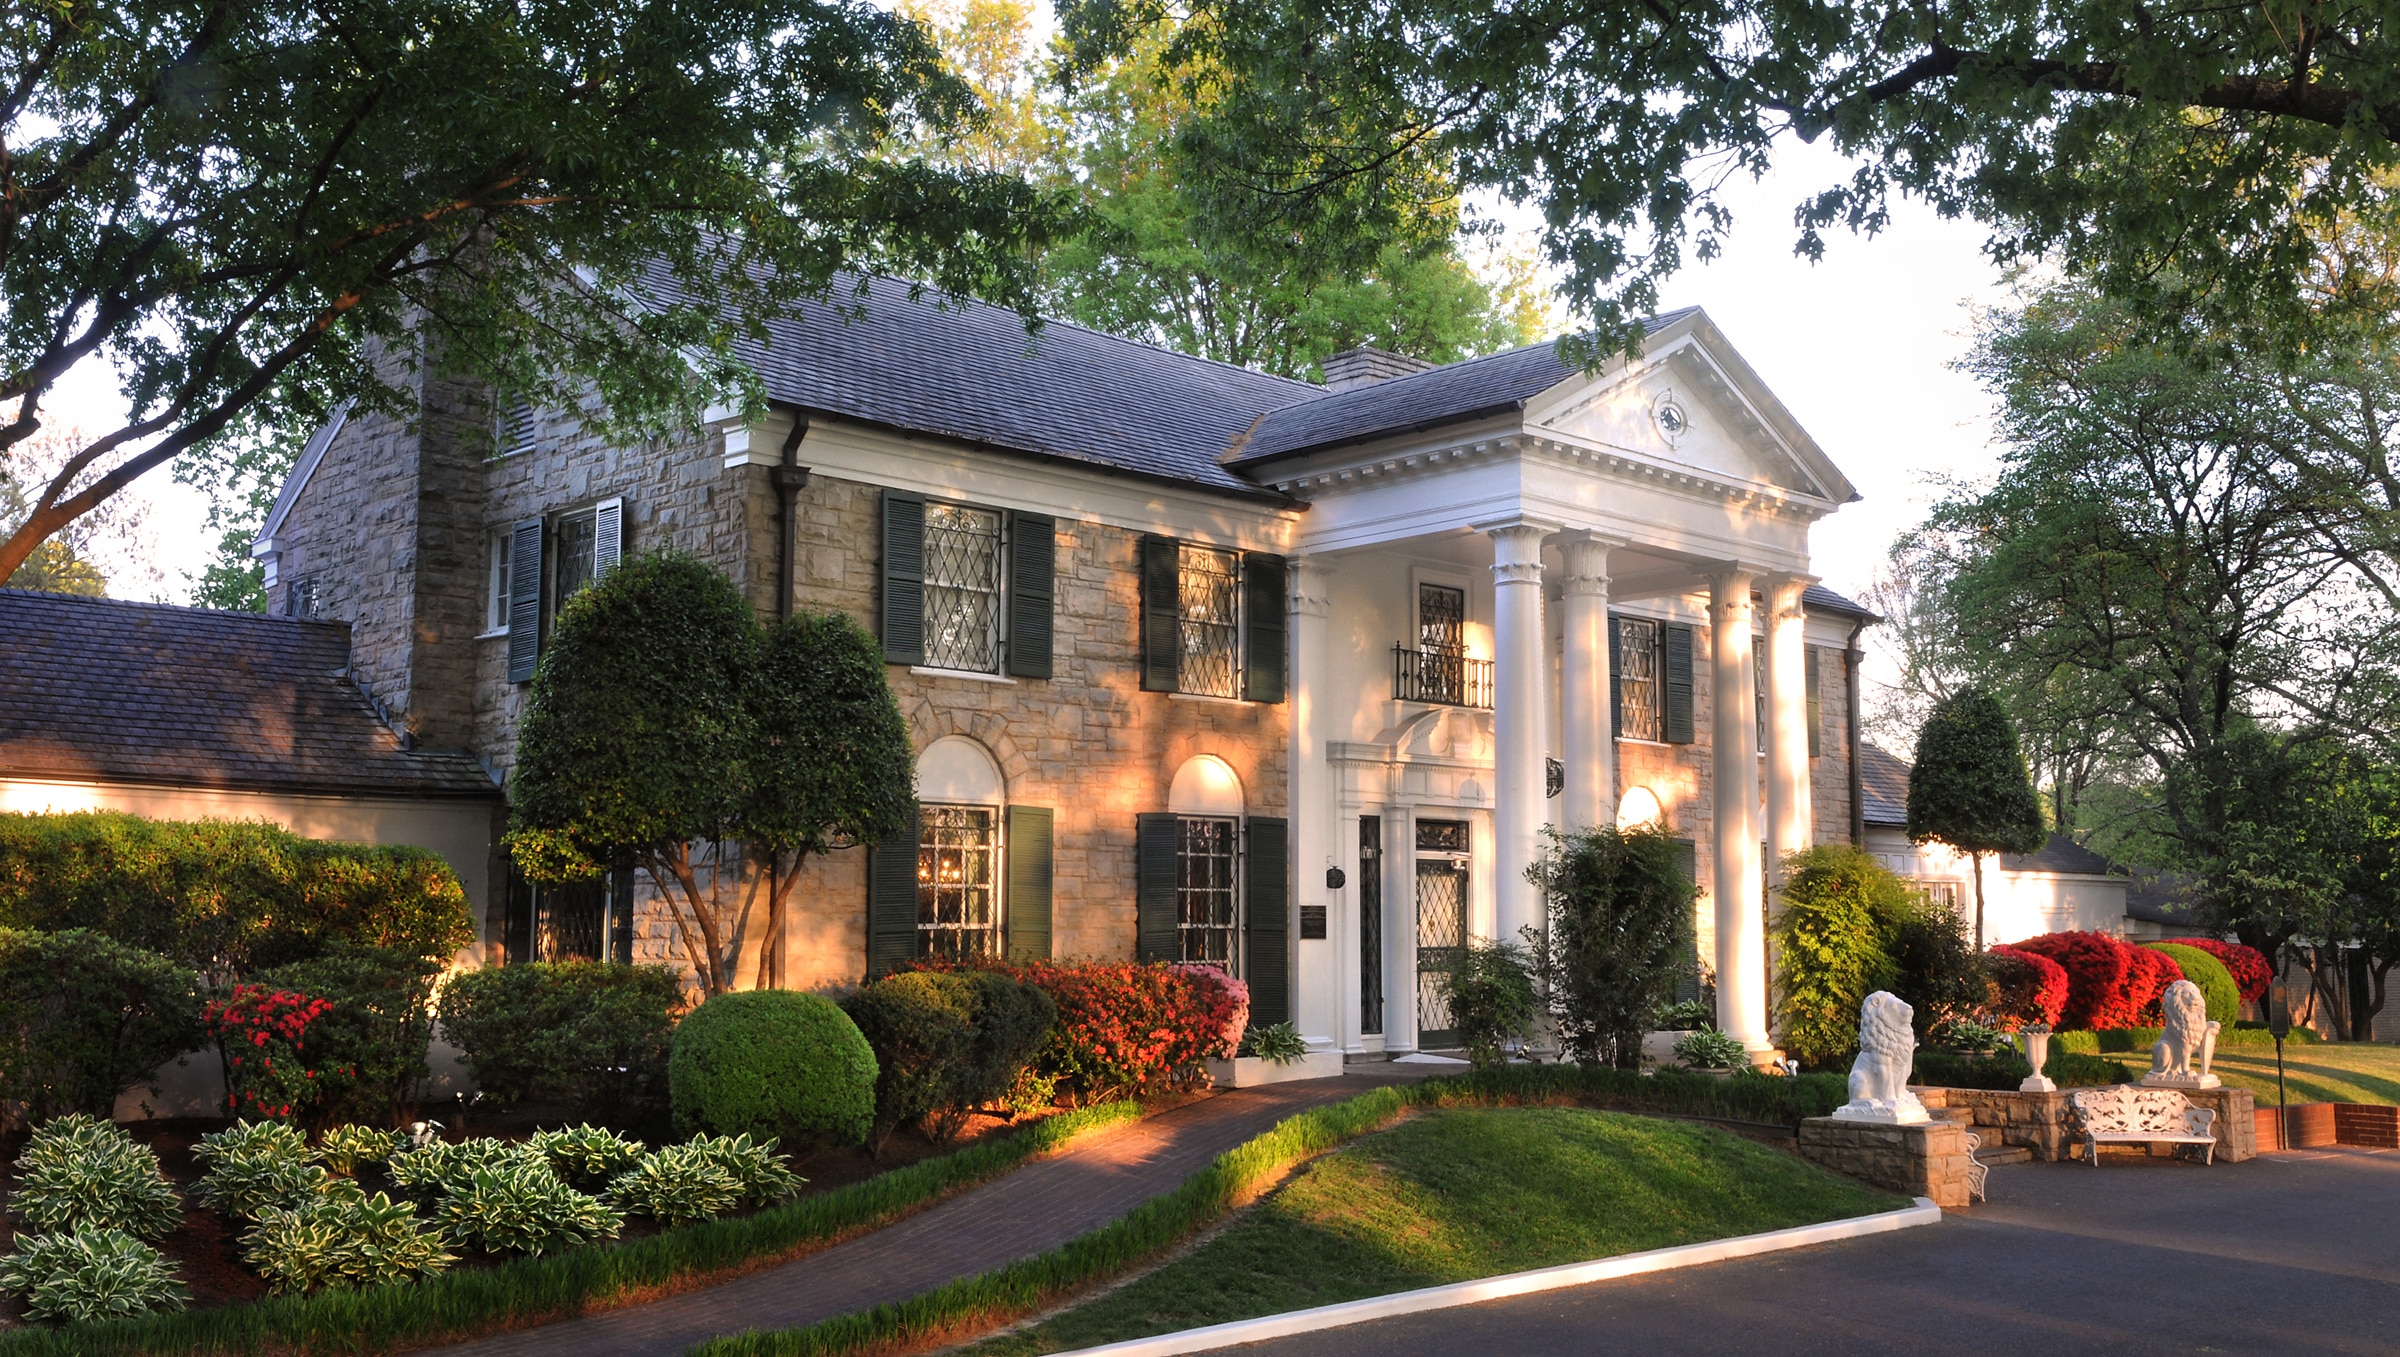 A photo of a white house, which is Graceland